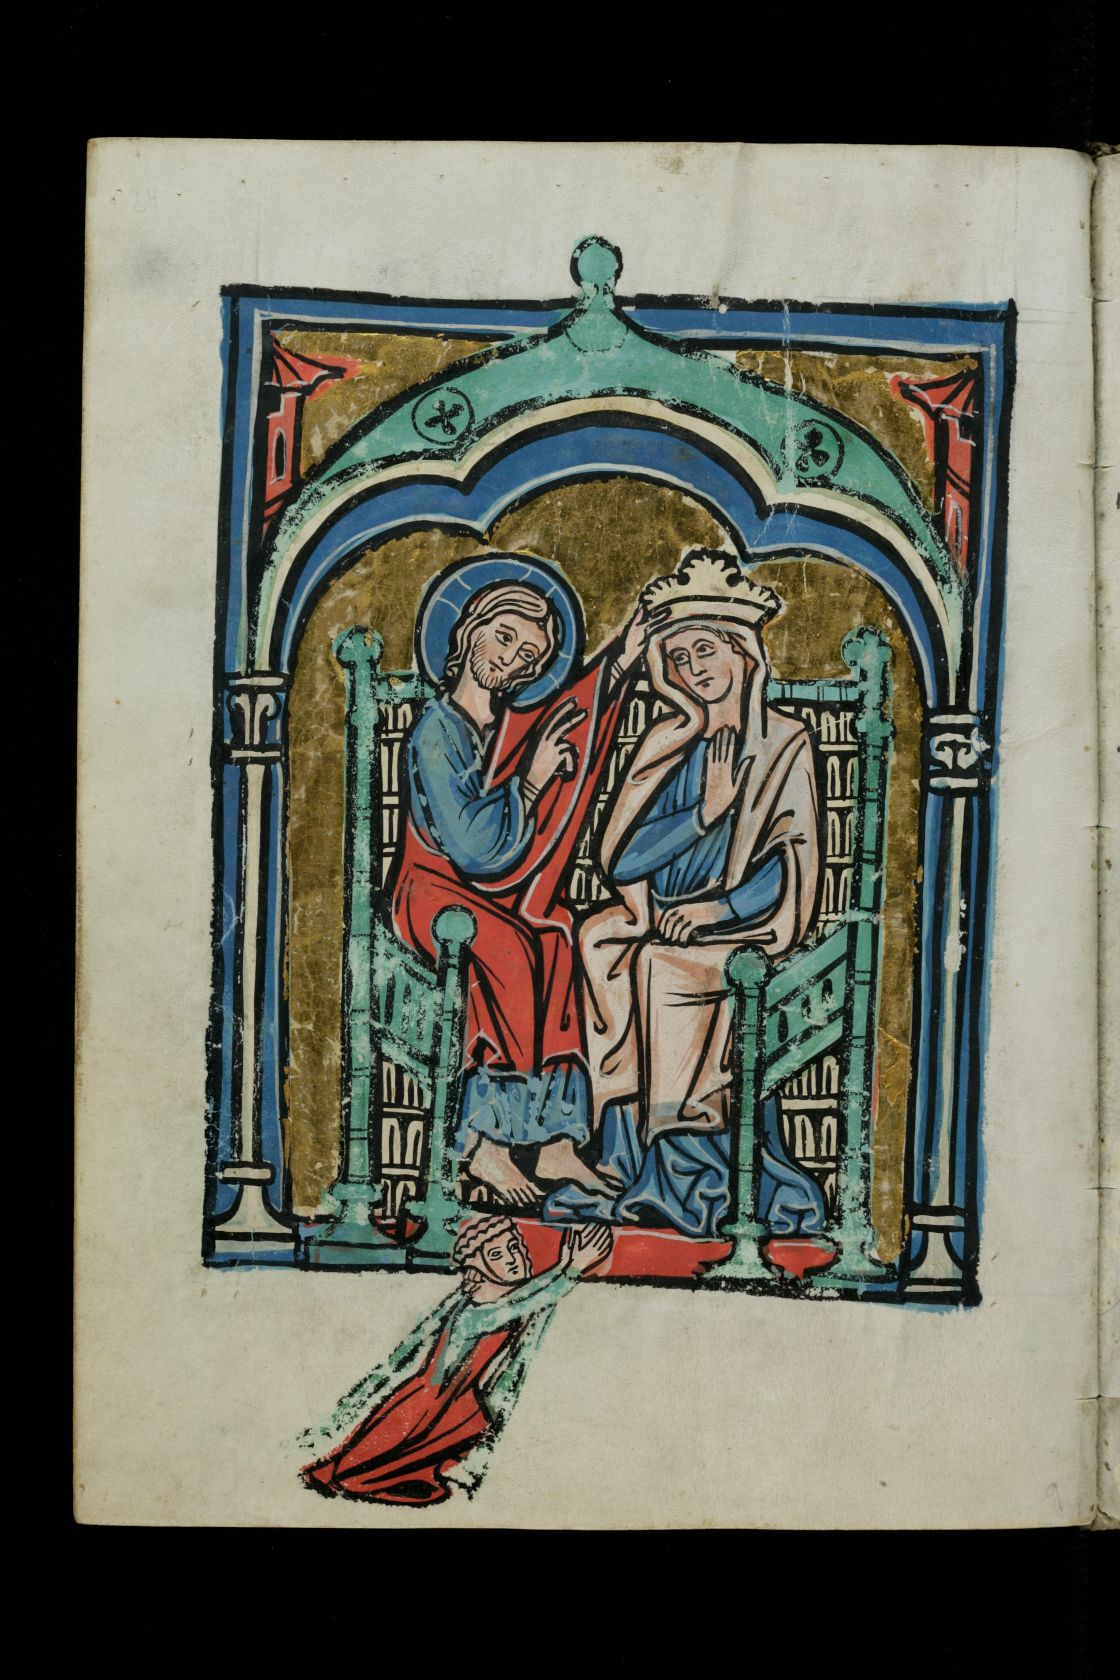 St. Gallen, Stiftsbibliothek, Cod. Sang. 402, p. 24 – Roman Breviary for Sundays and feast days